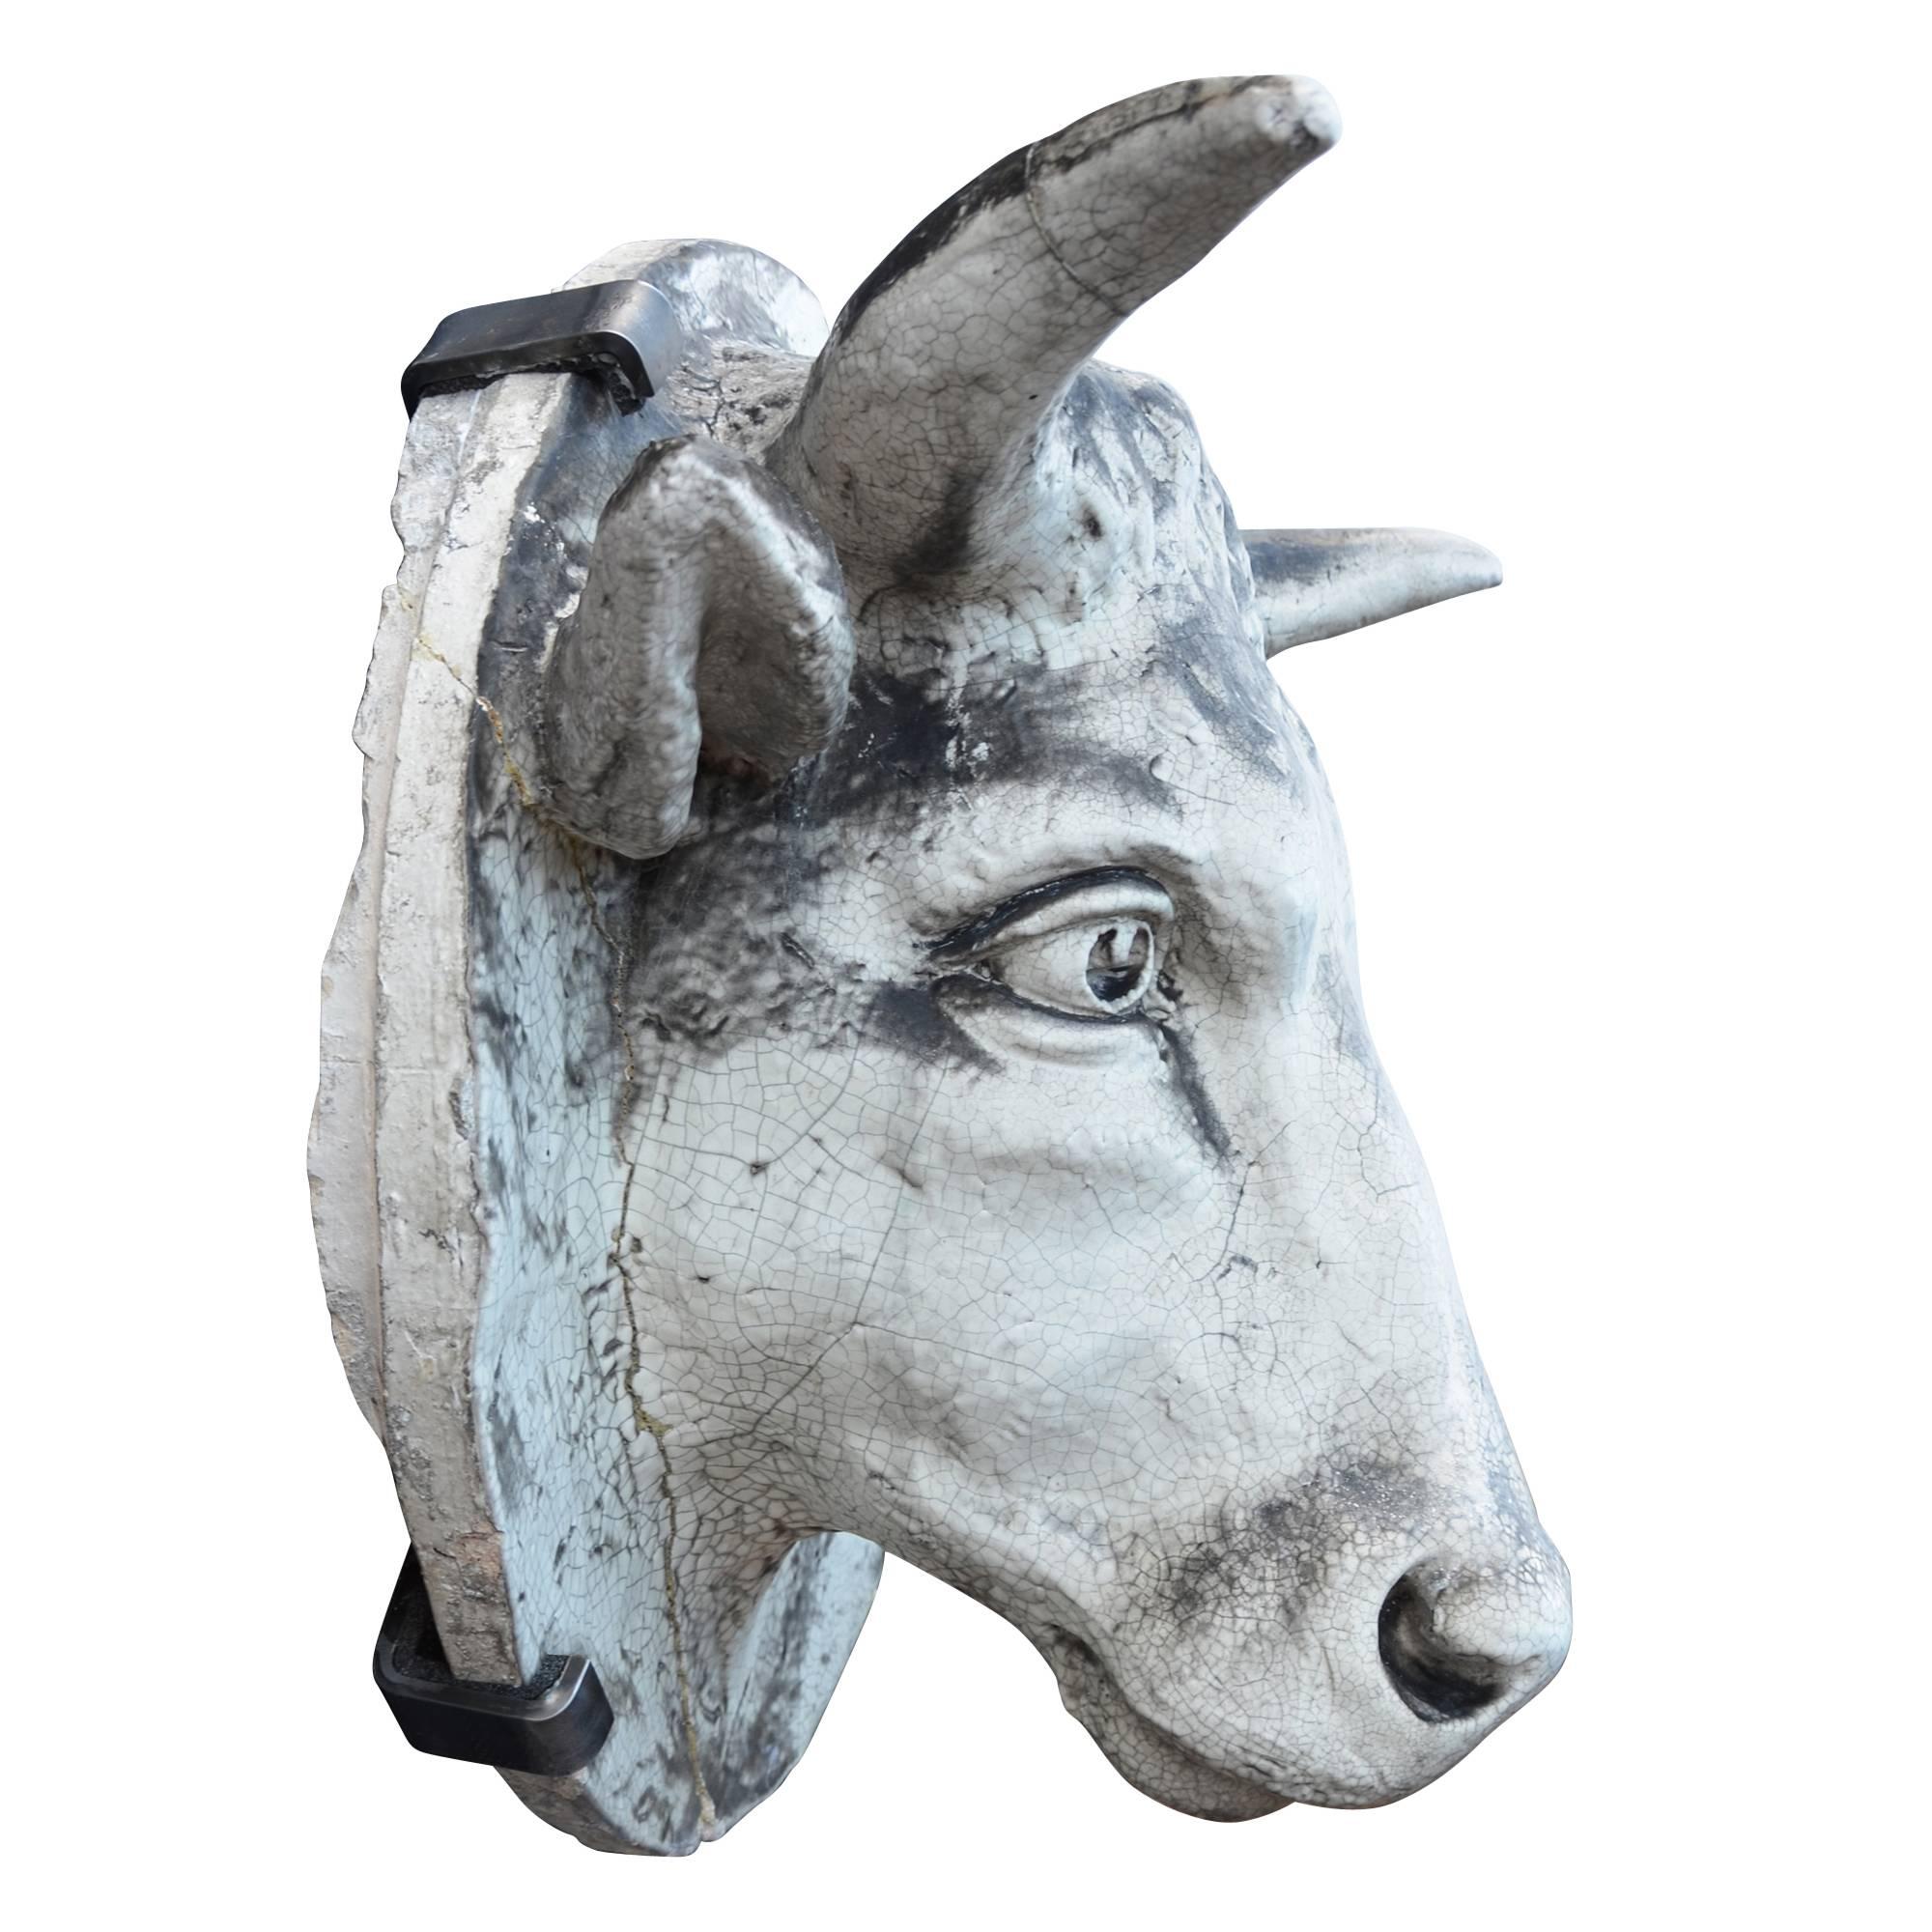 Salvaged from the front of a meat packing plant in Buffalo, NY, this astonishing bull's head is an incredible relic from the heyday of agricultural-Industrial dominance. Weighing nearly 80 pounds, the terra cotta proves to be a very durable, yet